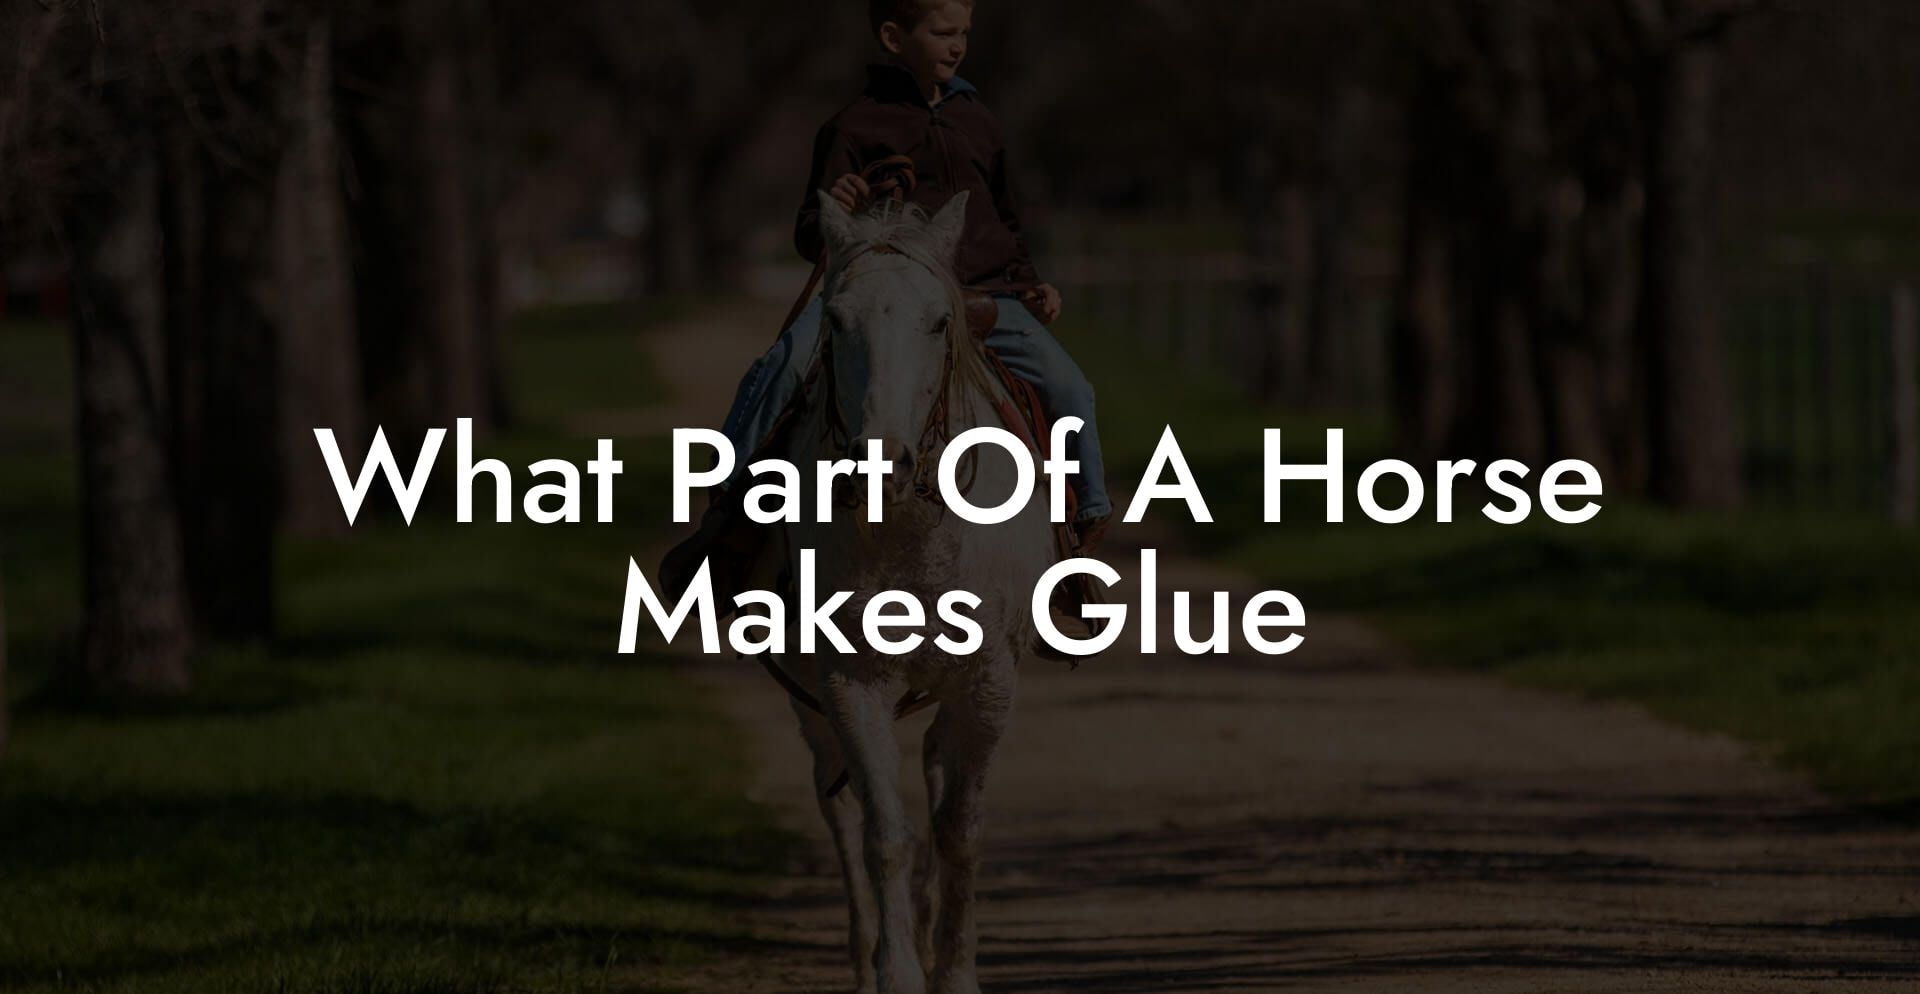 What Part Of A Horse Makes Glue